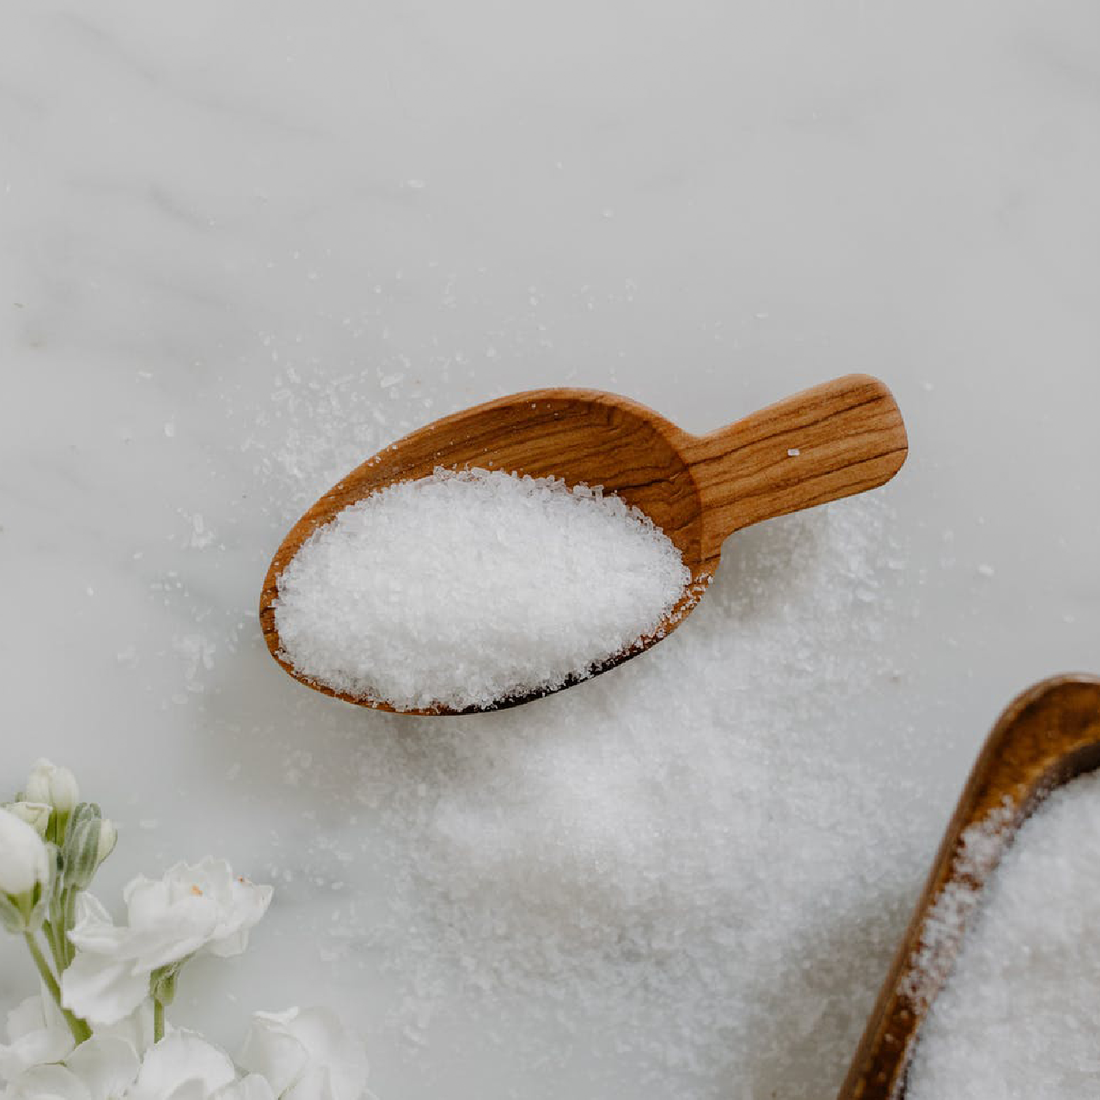 Closeup texture shot of epsom salt with wooden spoons and eucalyptus leaves